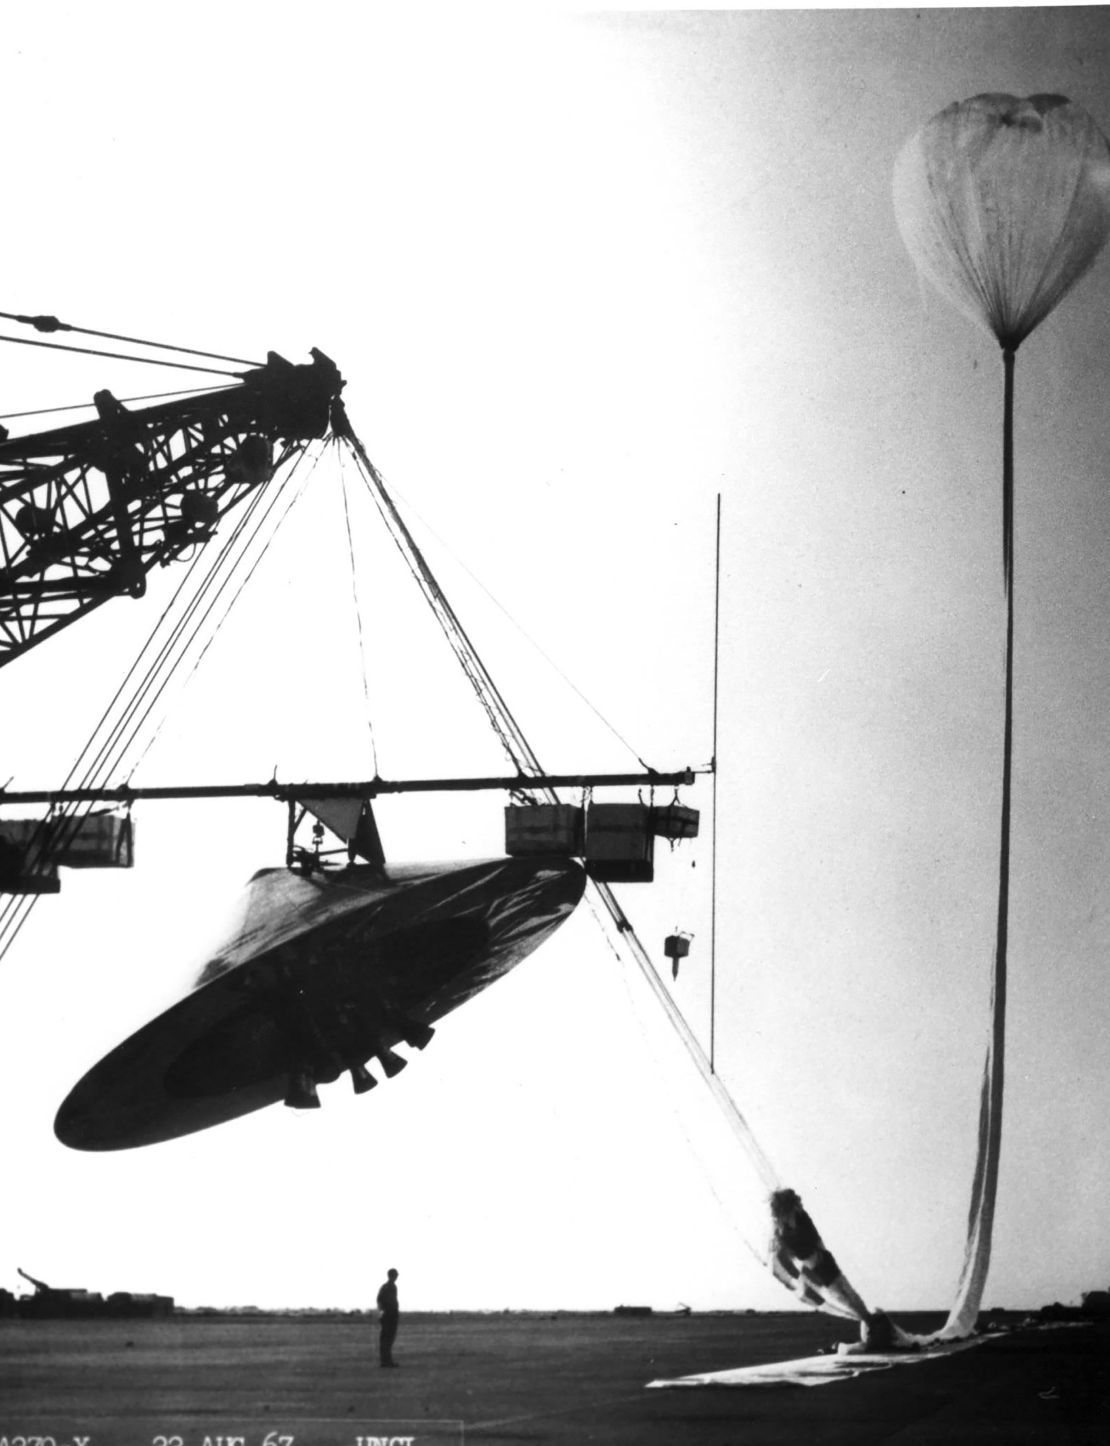 The U.S. Air Force released this photo June 24 of an aeroshell of a NASA Voyager Mars space probe prior to launch at Walker AFB, New Mexico (formerly Roswell AAF) as part of its report on the so called "Roswell Incident" of 1947. The Air Force reported June 24 that "space aliens" who supposedly crashed in the New Mexico desert 50 years ago were only military dummies and that descriptions of research projects involving low altitude tethered objects such as this may have become part of the incident. The 231-page report is aimed at ending longstanding speculation over the incident and denies that the military had recovered bodies from damaged flying saucers in 1947 and had been covering up the incident ever since.